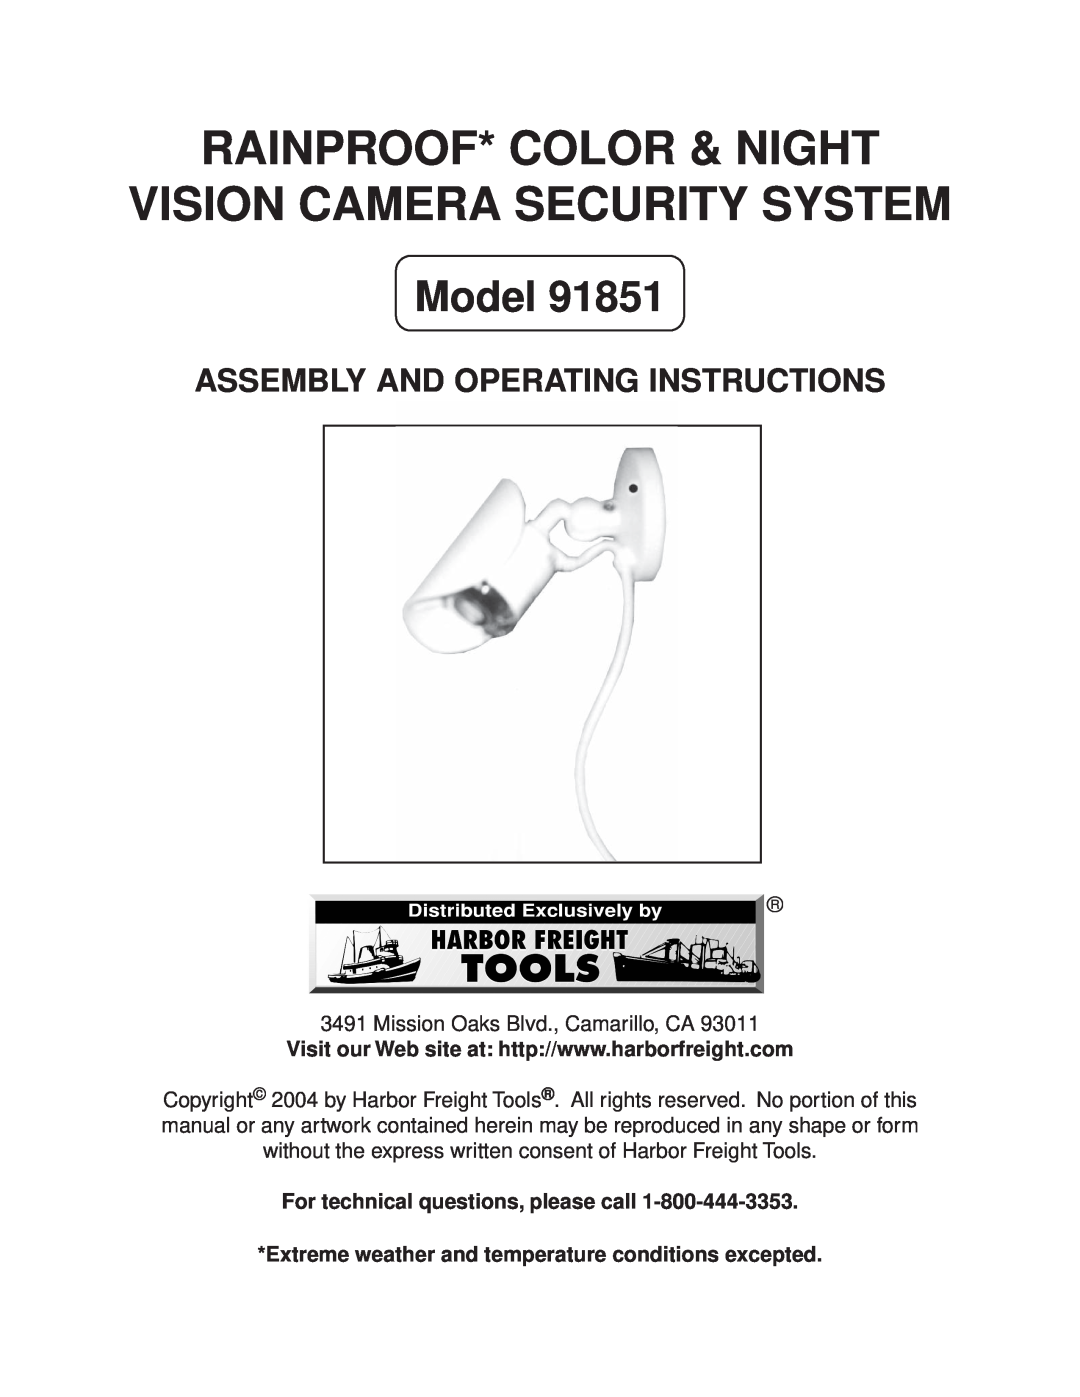 Harbor Freight Tools Model 91851 manual Rainproof* Color & Night, Vision Camera Security System 